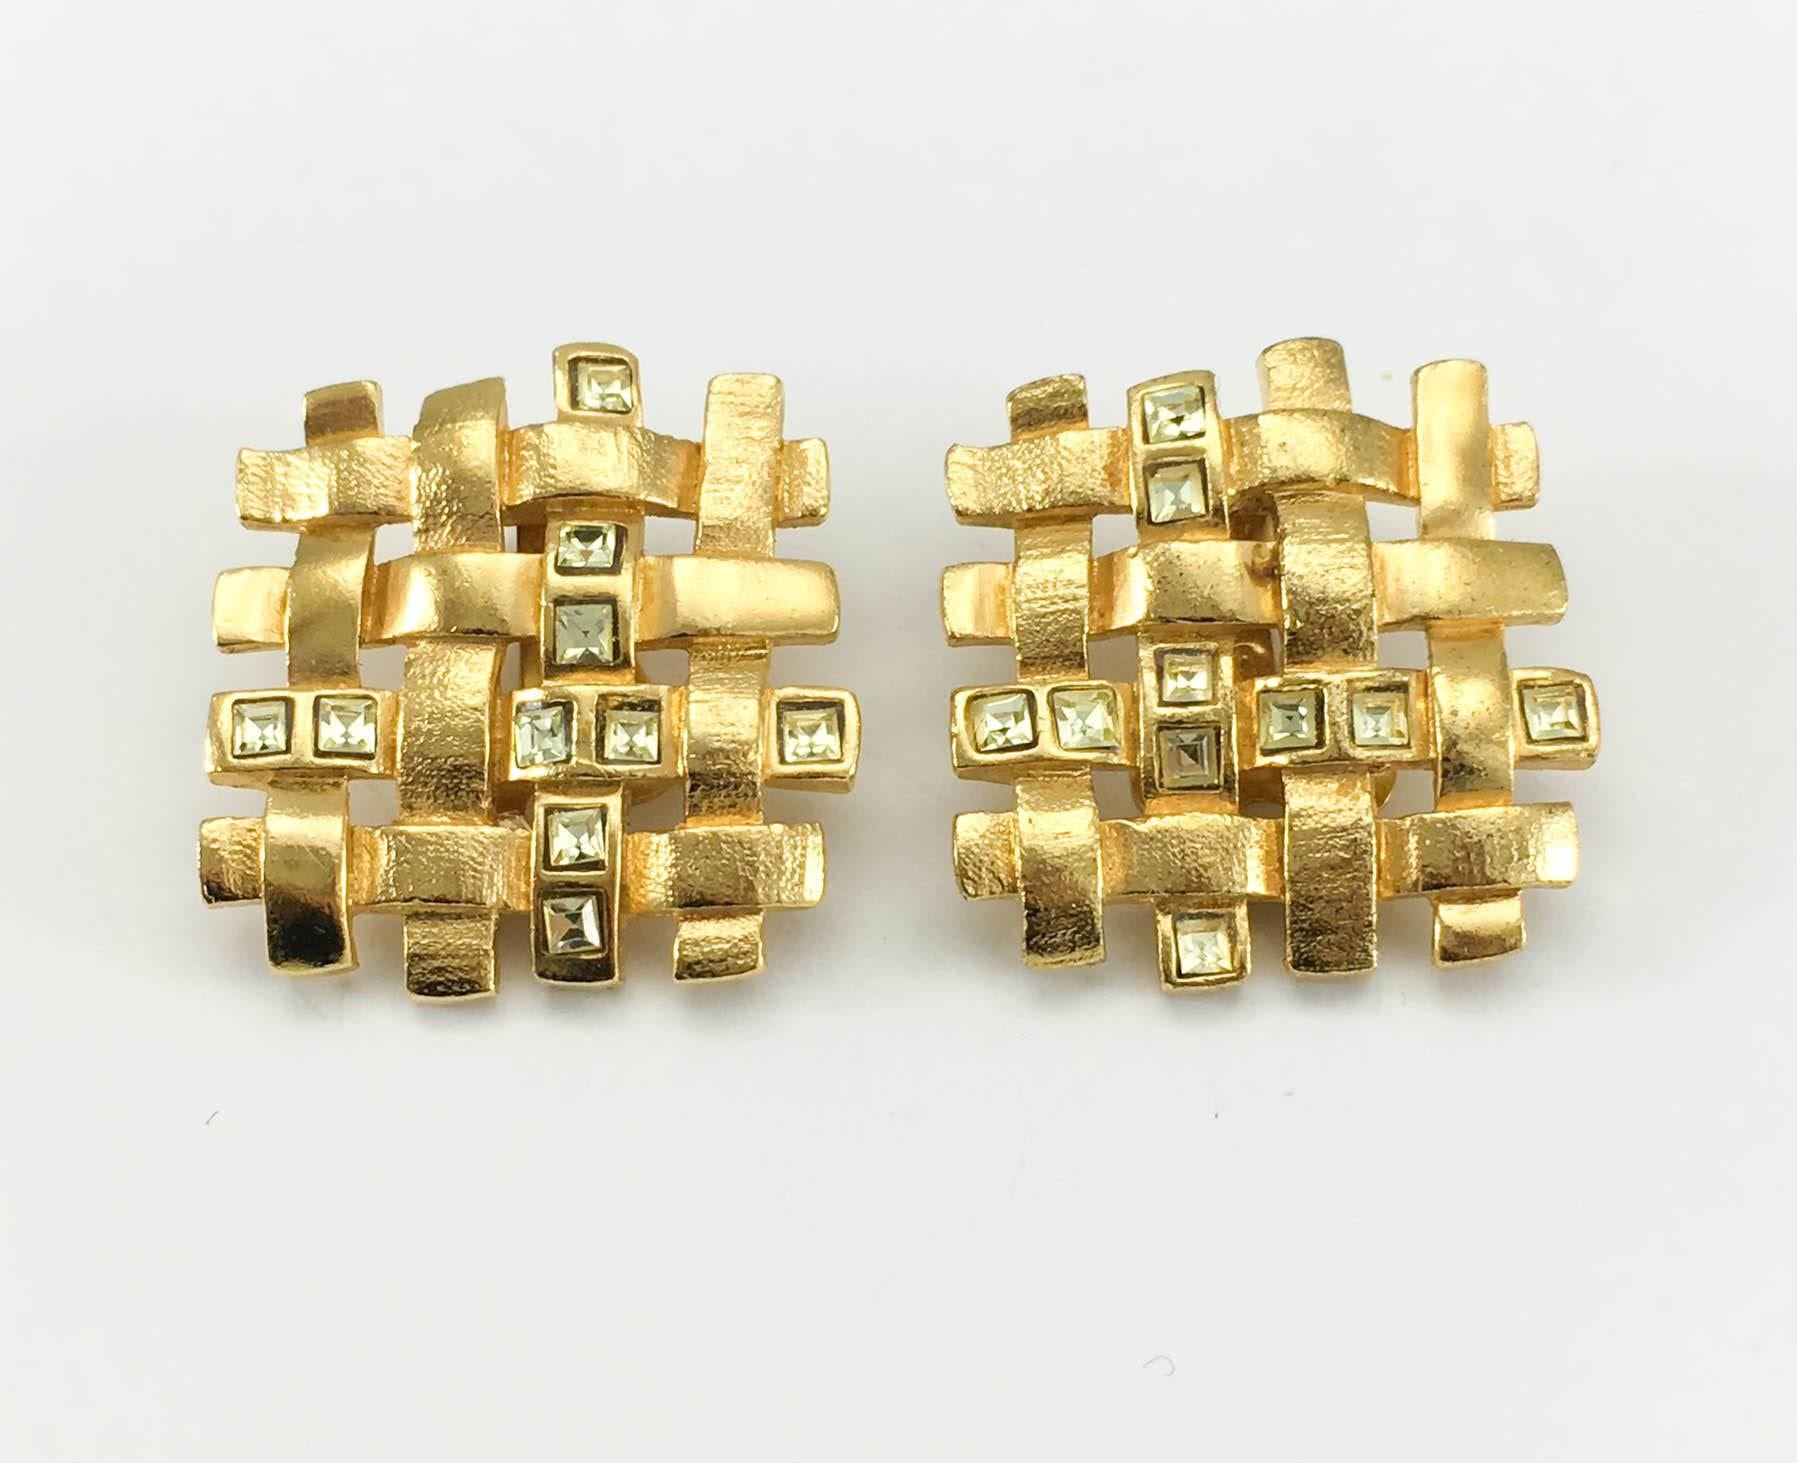 Yves Saint Laurent 'Woven' Gilt Earrings With Pale Green Rhinestones - 1980's In Excellent Condition In London, Chelsea